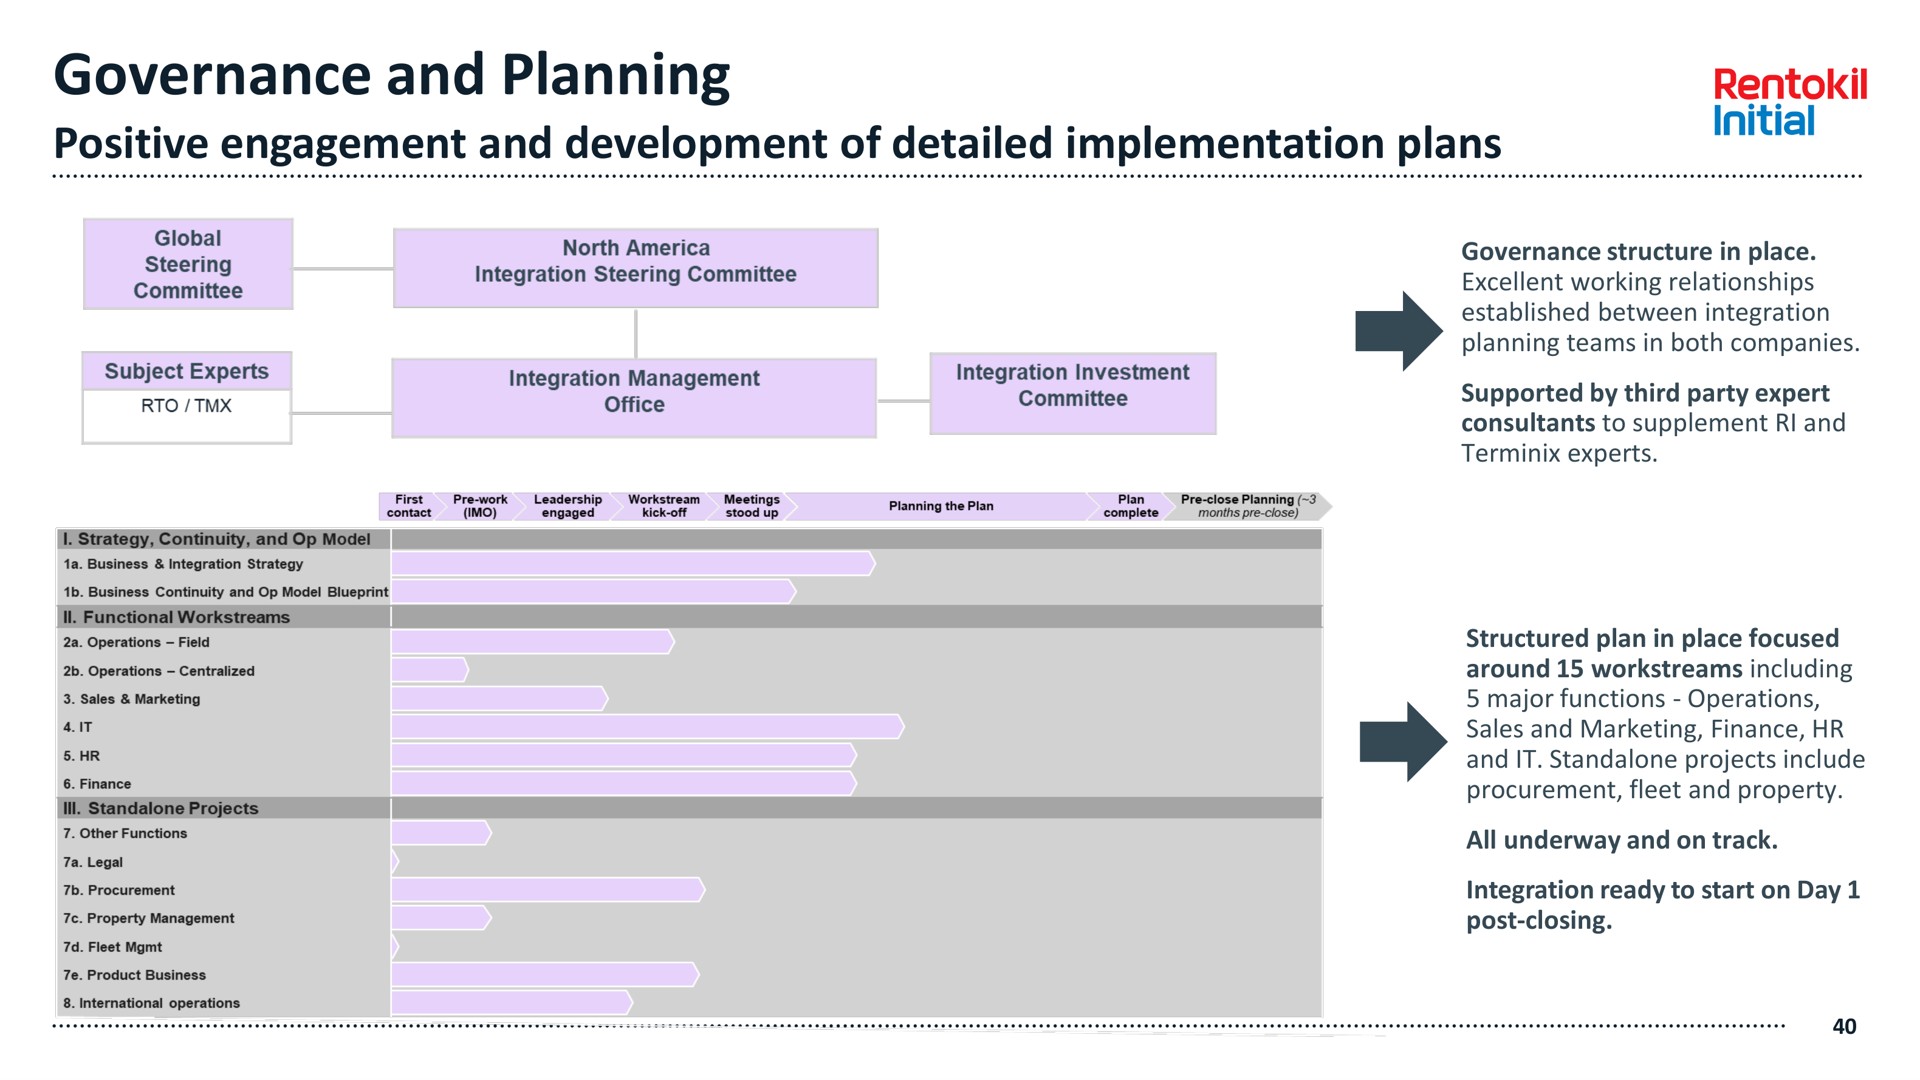 governance and planning positive engagement and development of detailed implementation plans | Rentokil Initial